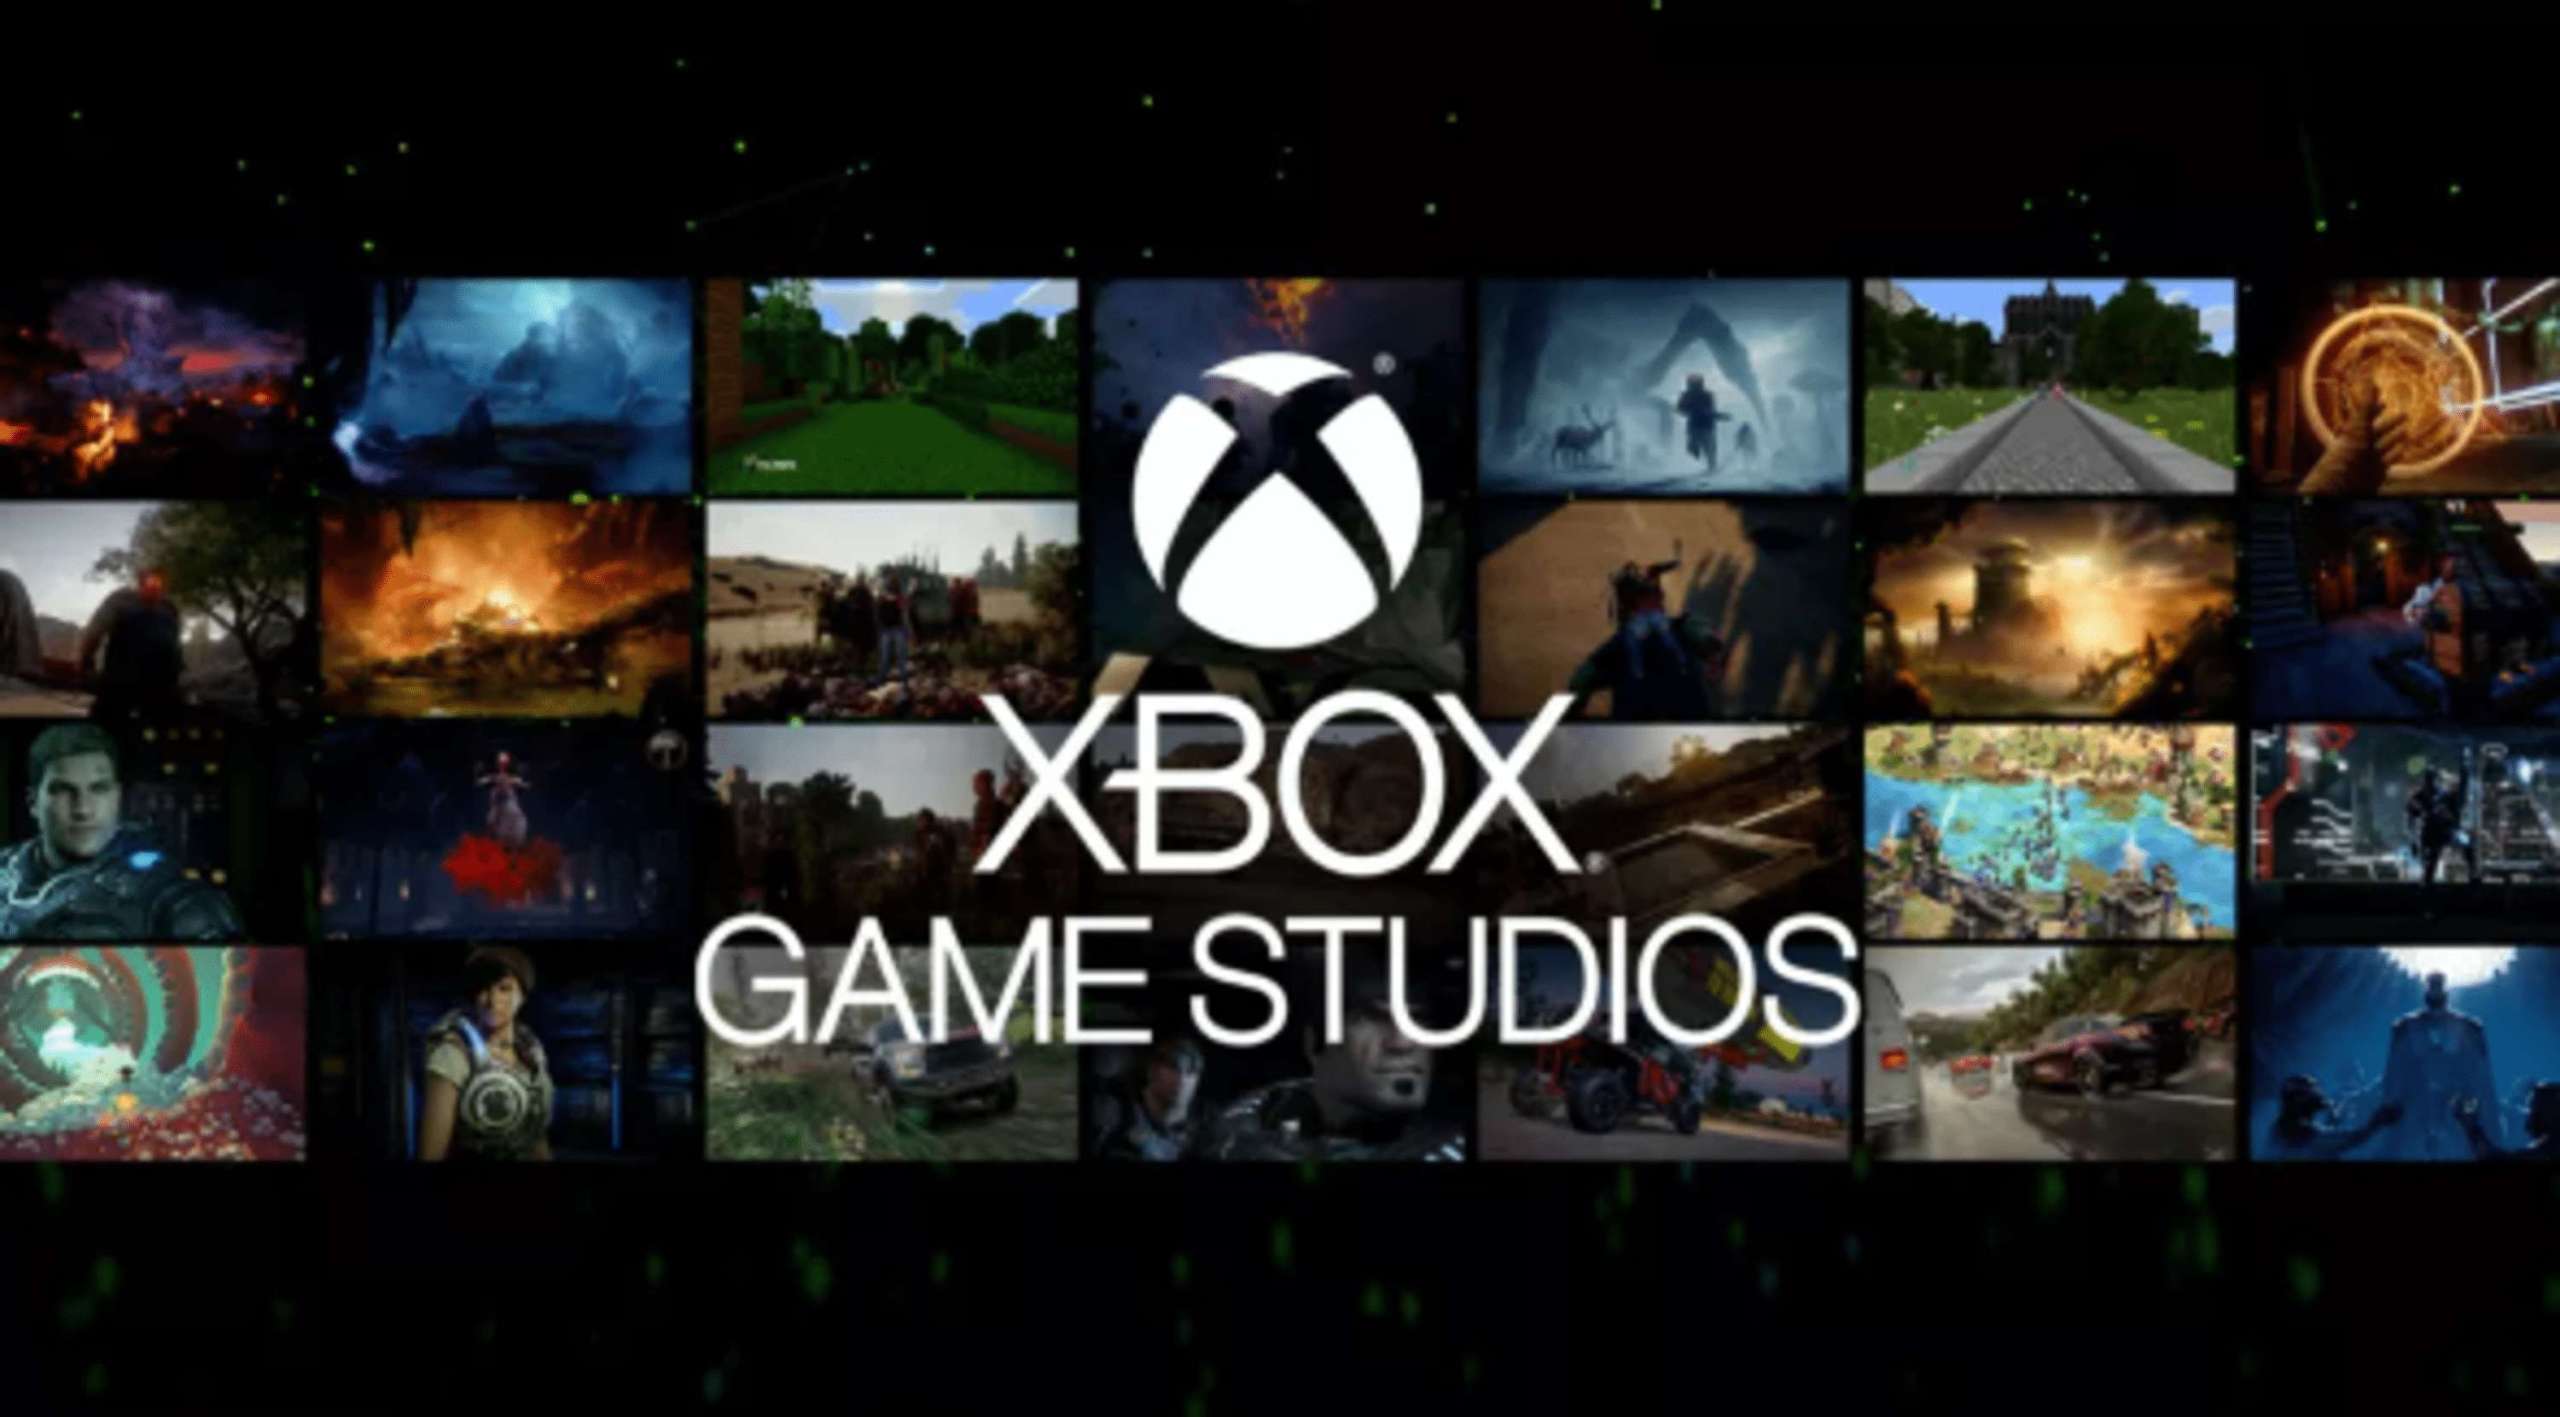 The head Of Xbox Games Studios Says His Ambition Is To Test Artificial Intelligence